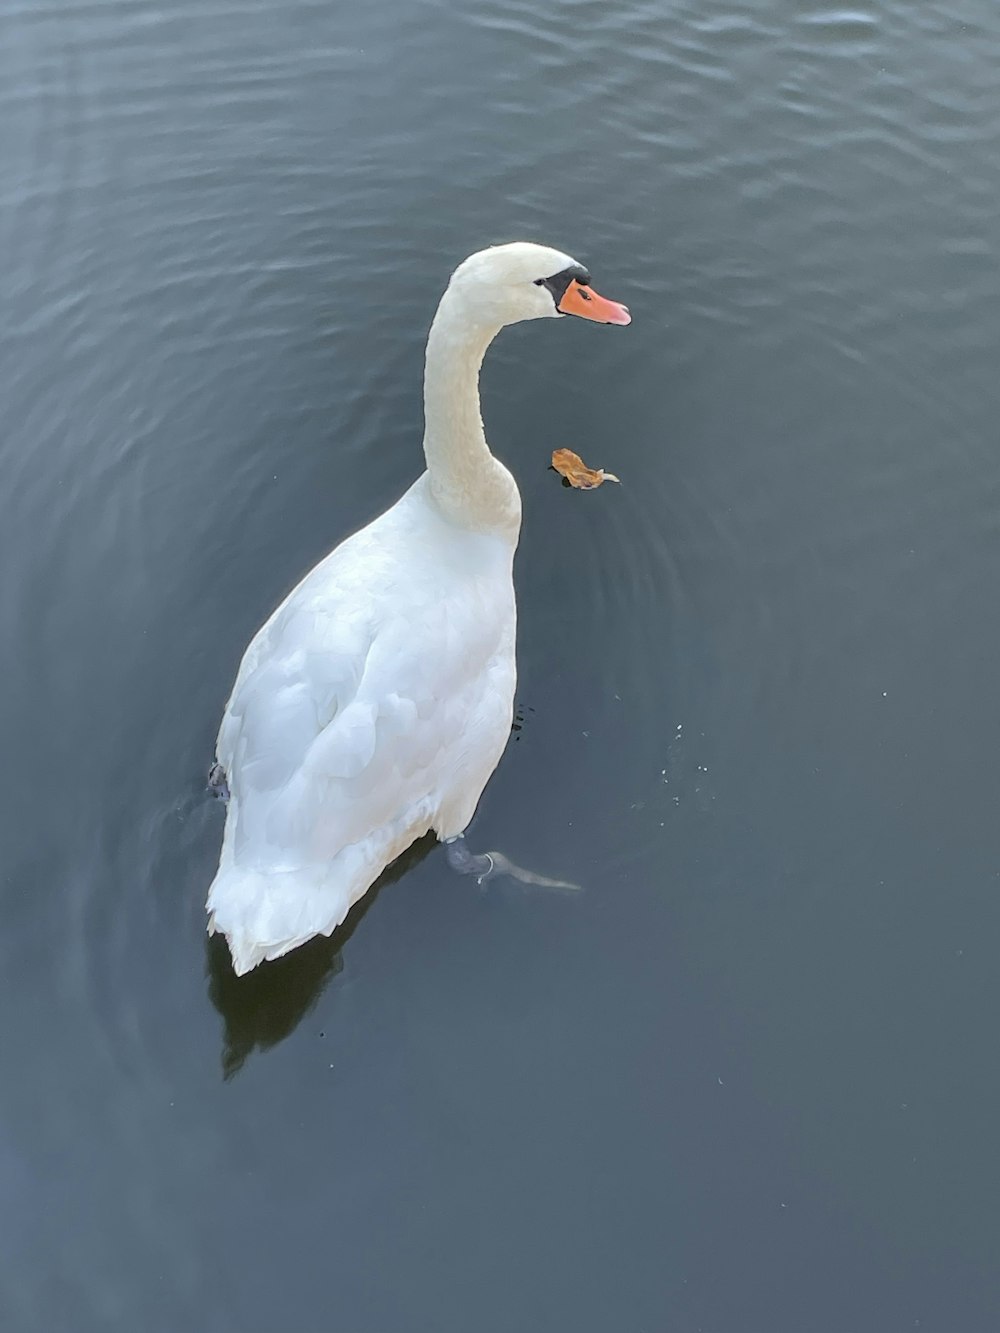 a white duck in water